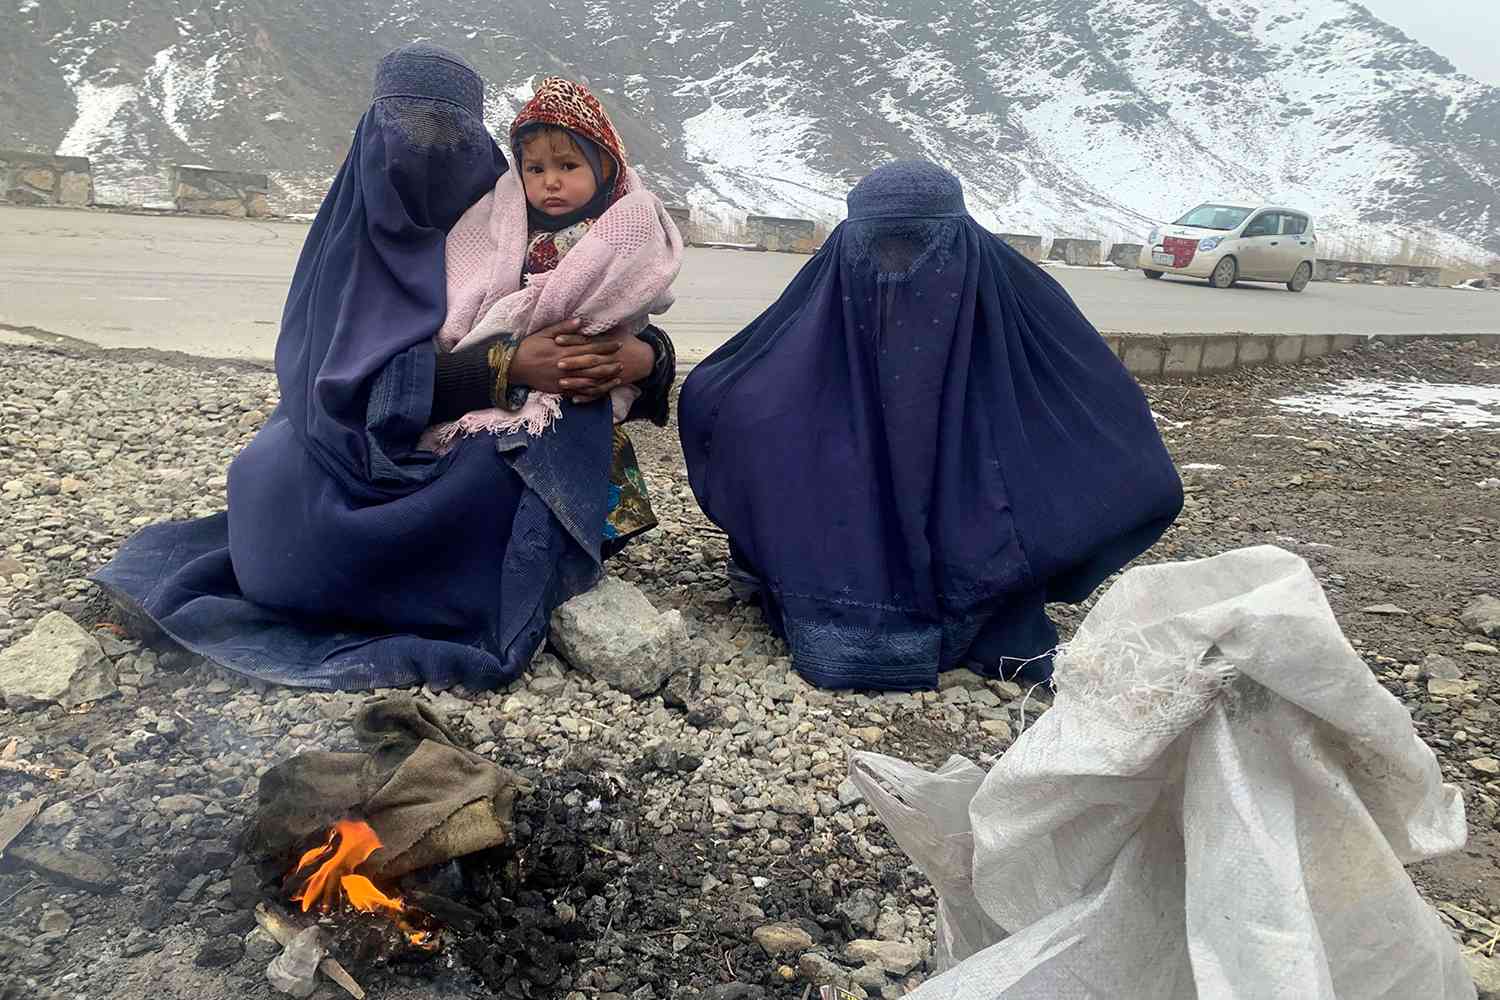 Aid Workers Are Rushing to Save Afghans amid Freezing Weather: 'Race Against Time'